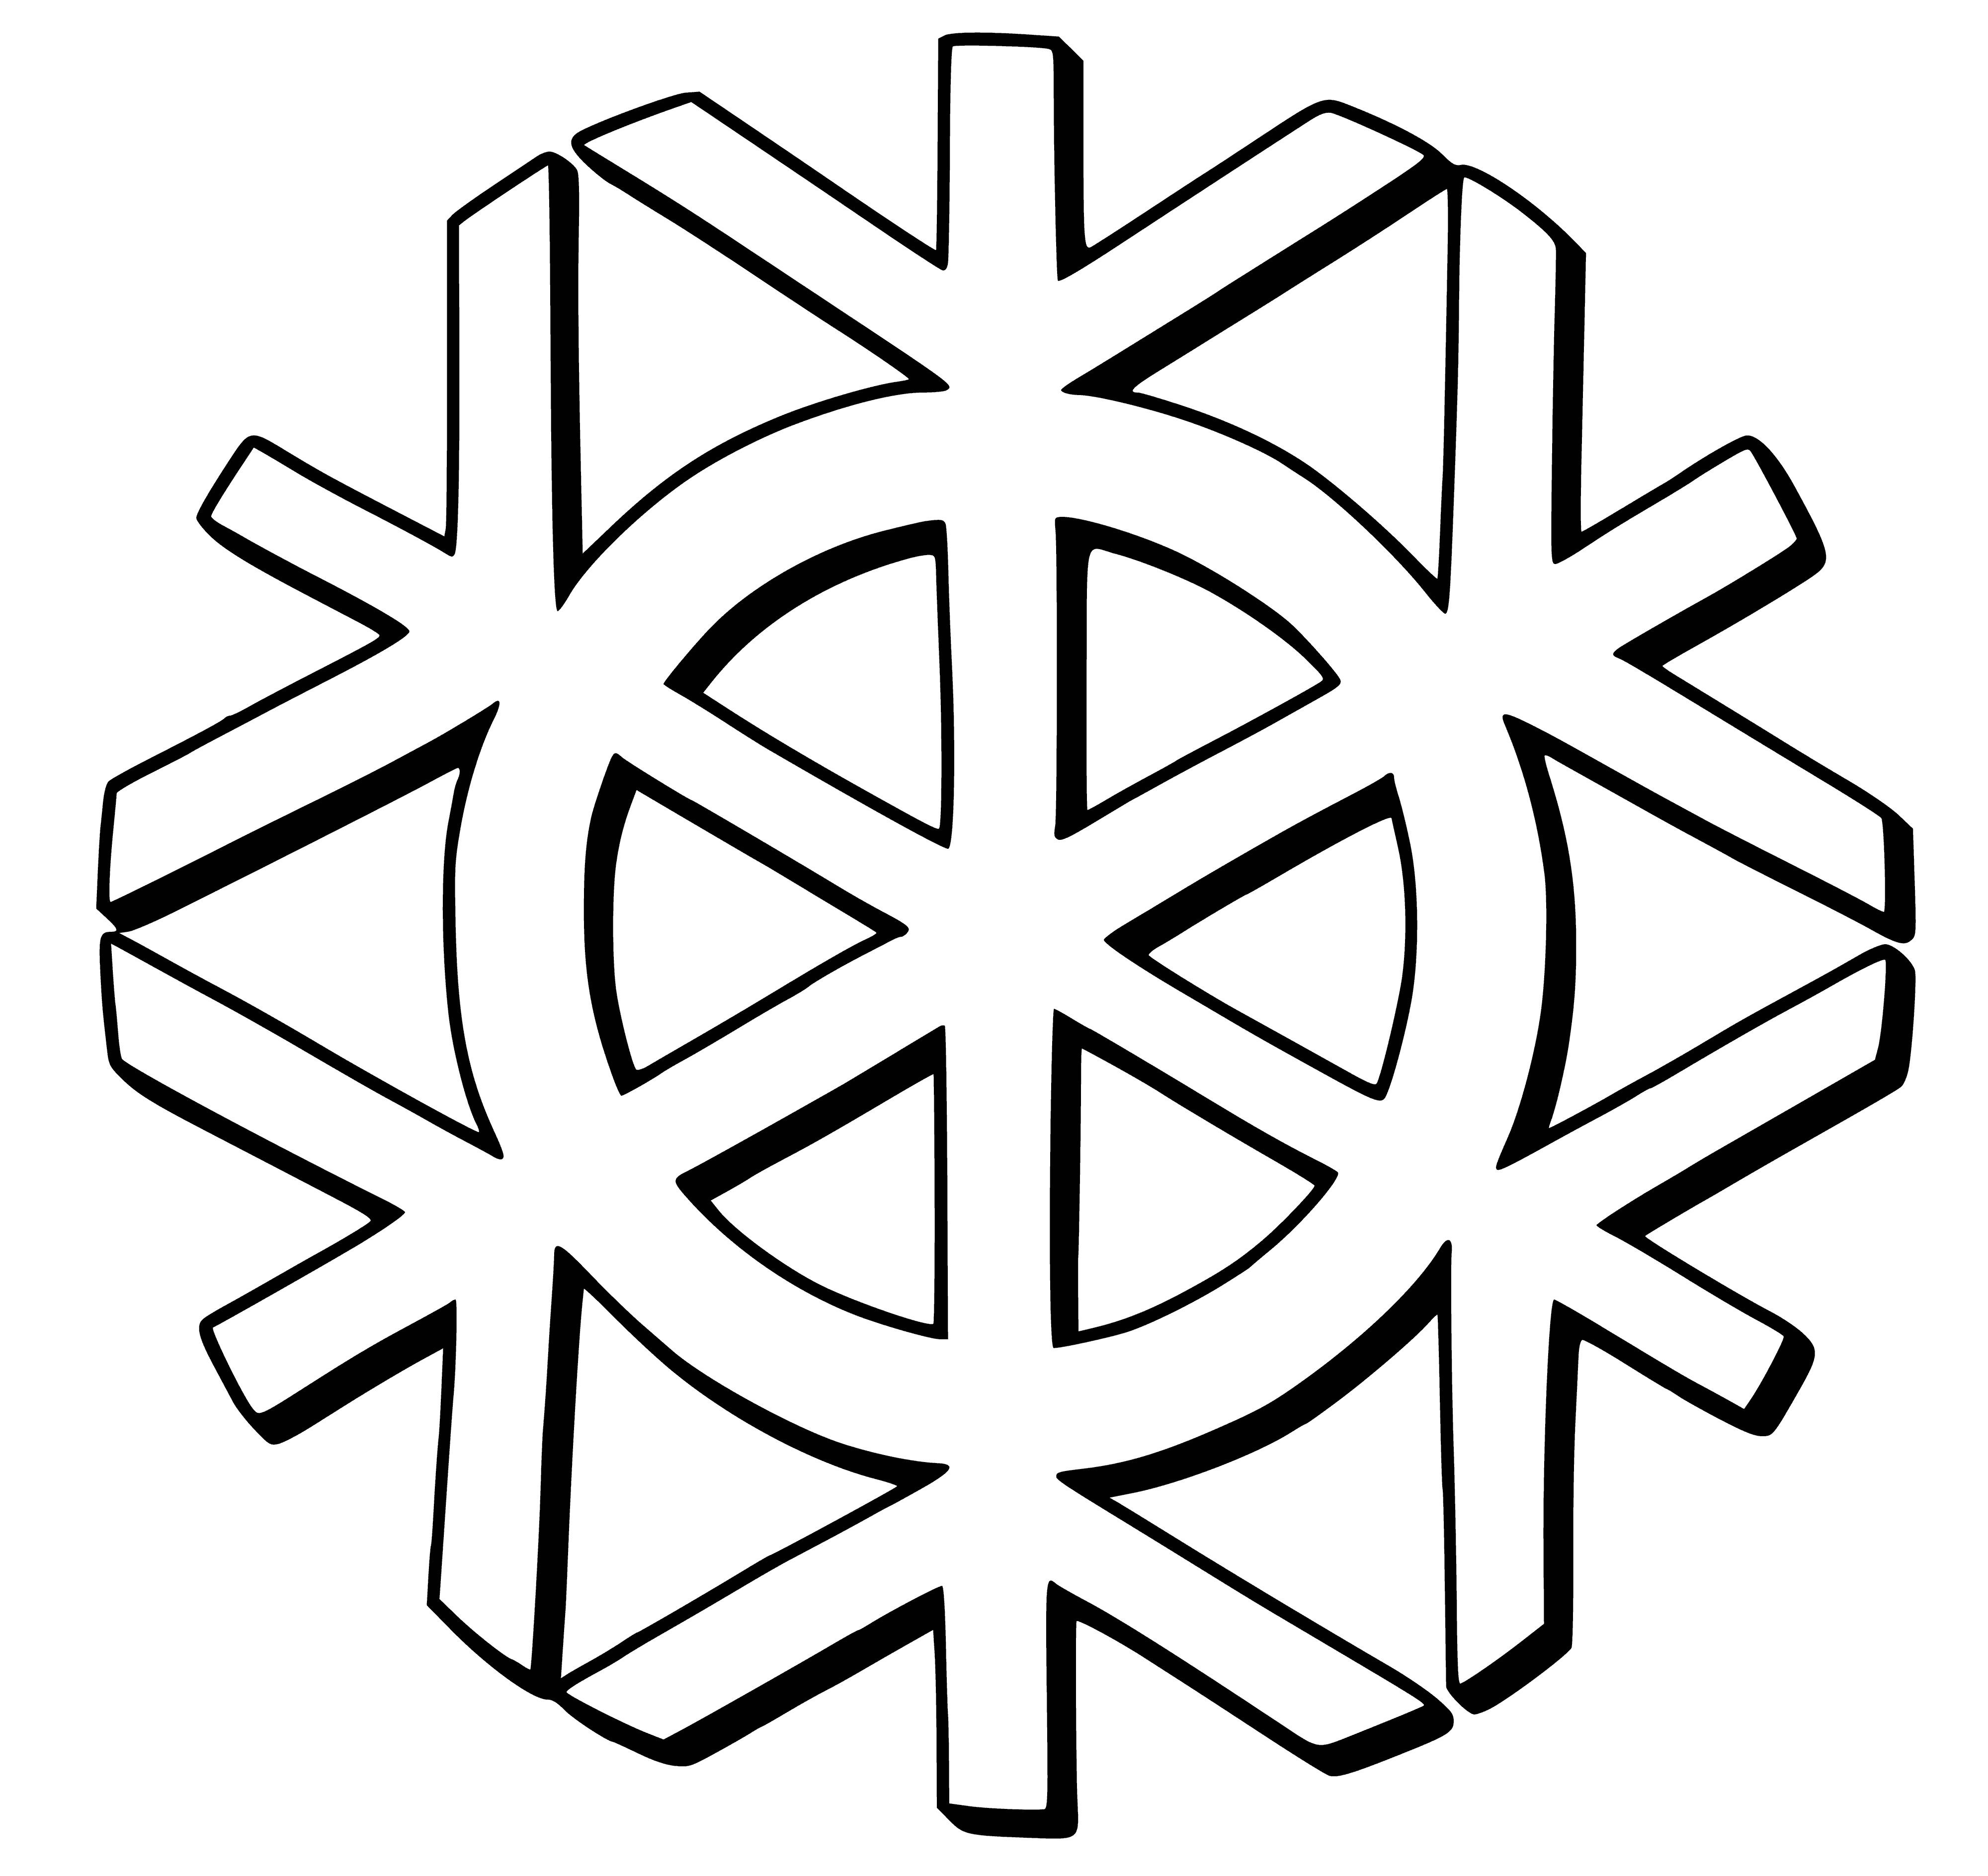 coloring page: A colorful snowflake backdrop featuring trees and houses. Snowflakes come in various sizes and shapes, some with intricate patterns. #winter